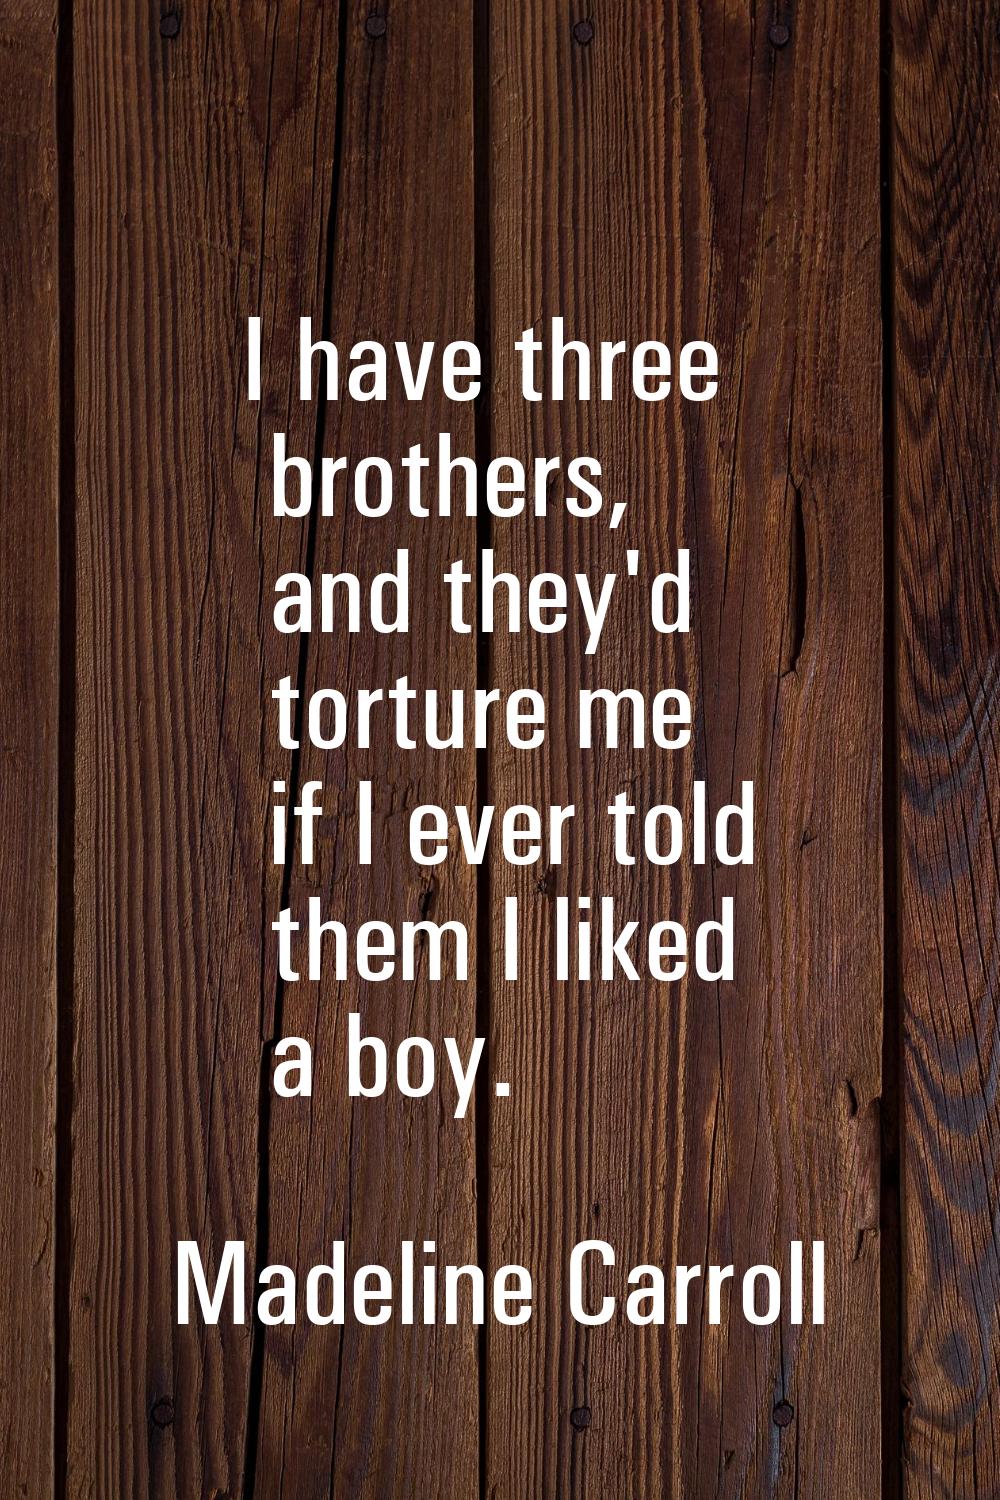 I have three brothers, and they'd torture me if I ever told them I liked a boy.